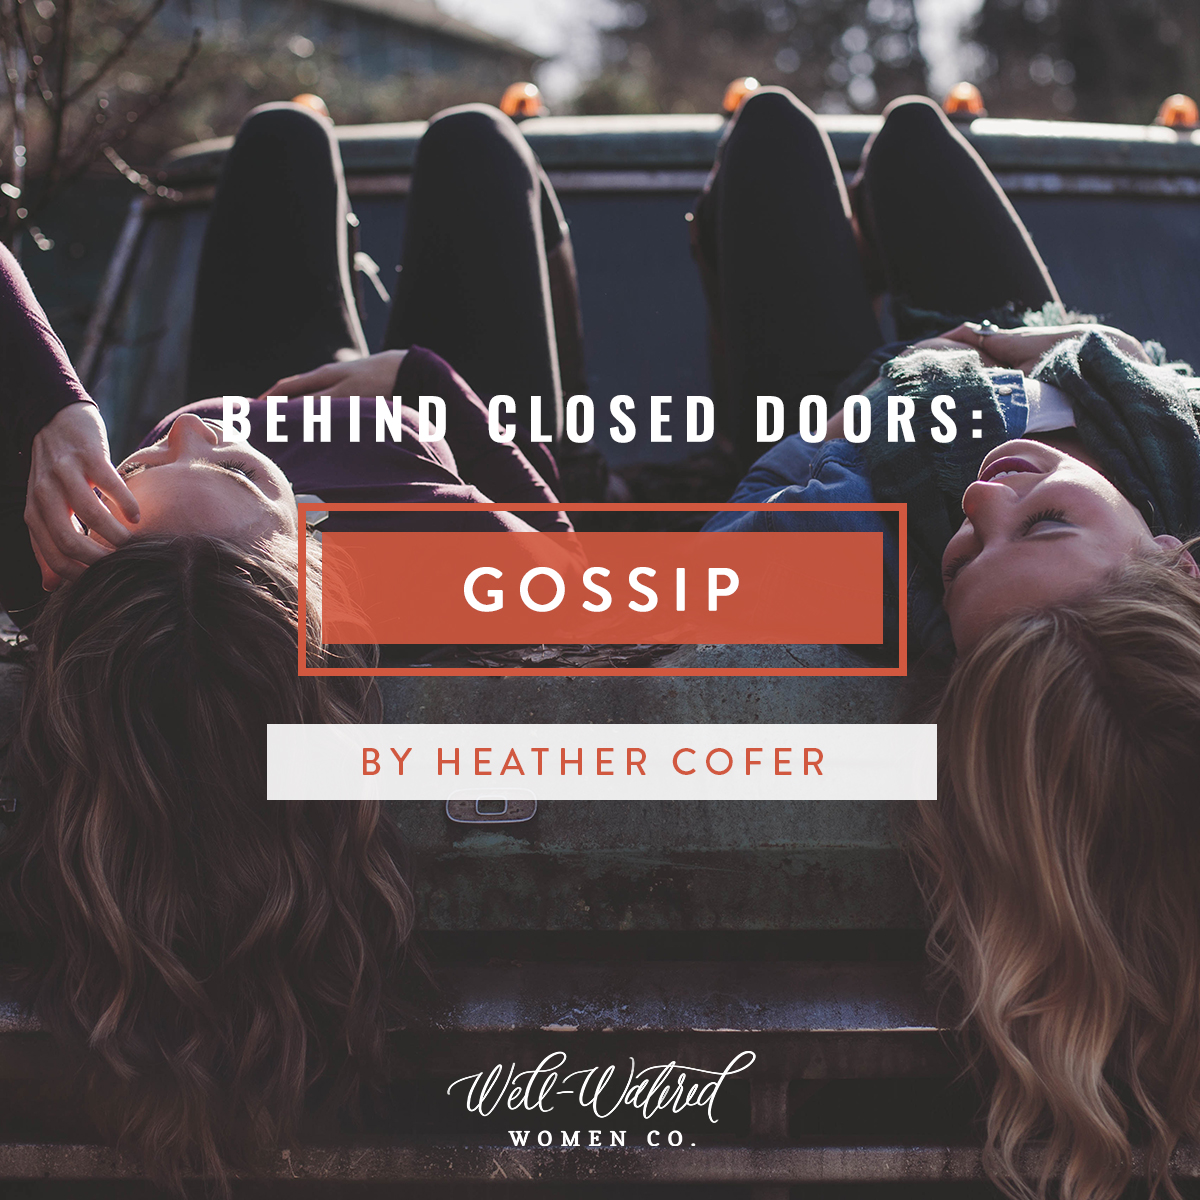 Well-Watered Women | Behind Closed Doors: Gossip | There may be fires we’ve caused with this tongue that we will always regret. But as we walk forward in repentance and humility, freshly surrendering our mouths to be used for the glory of God, He transforms and uses us to speak from a heart that knows just how much we have been saved from.